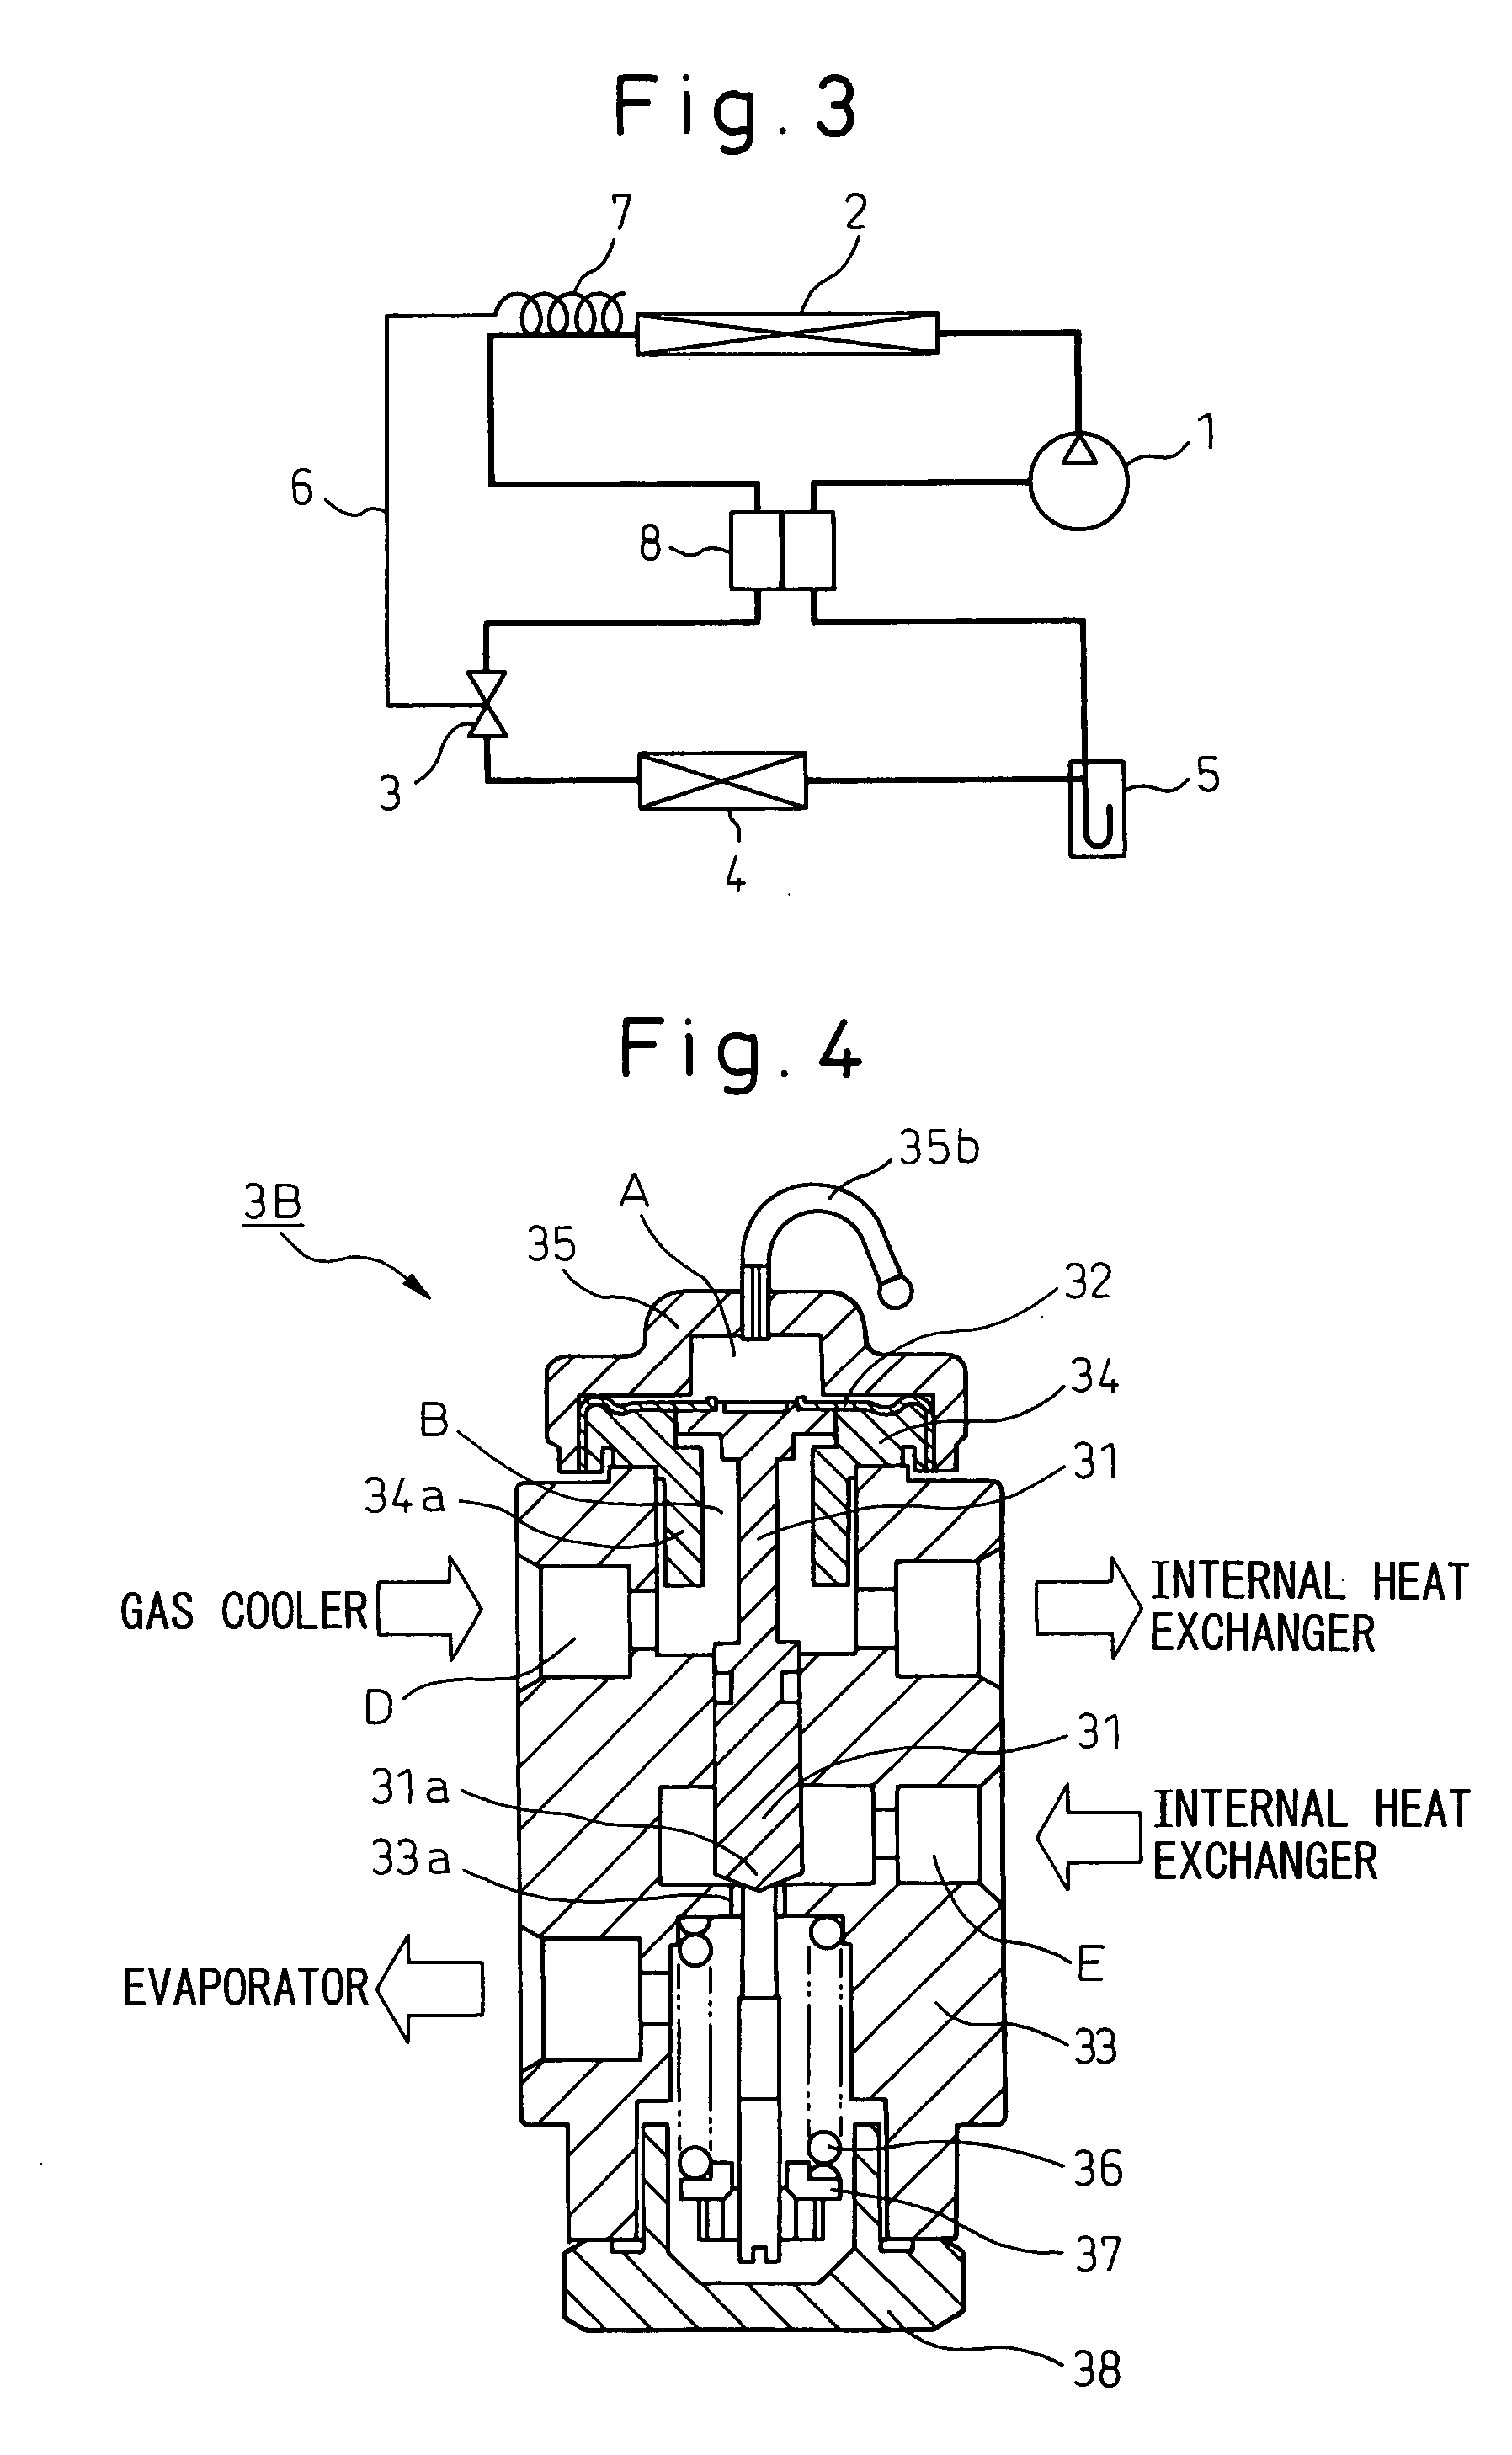 Expansion valve for refrigerating cycle